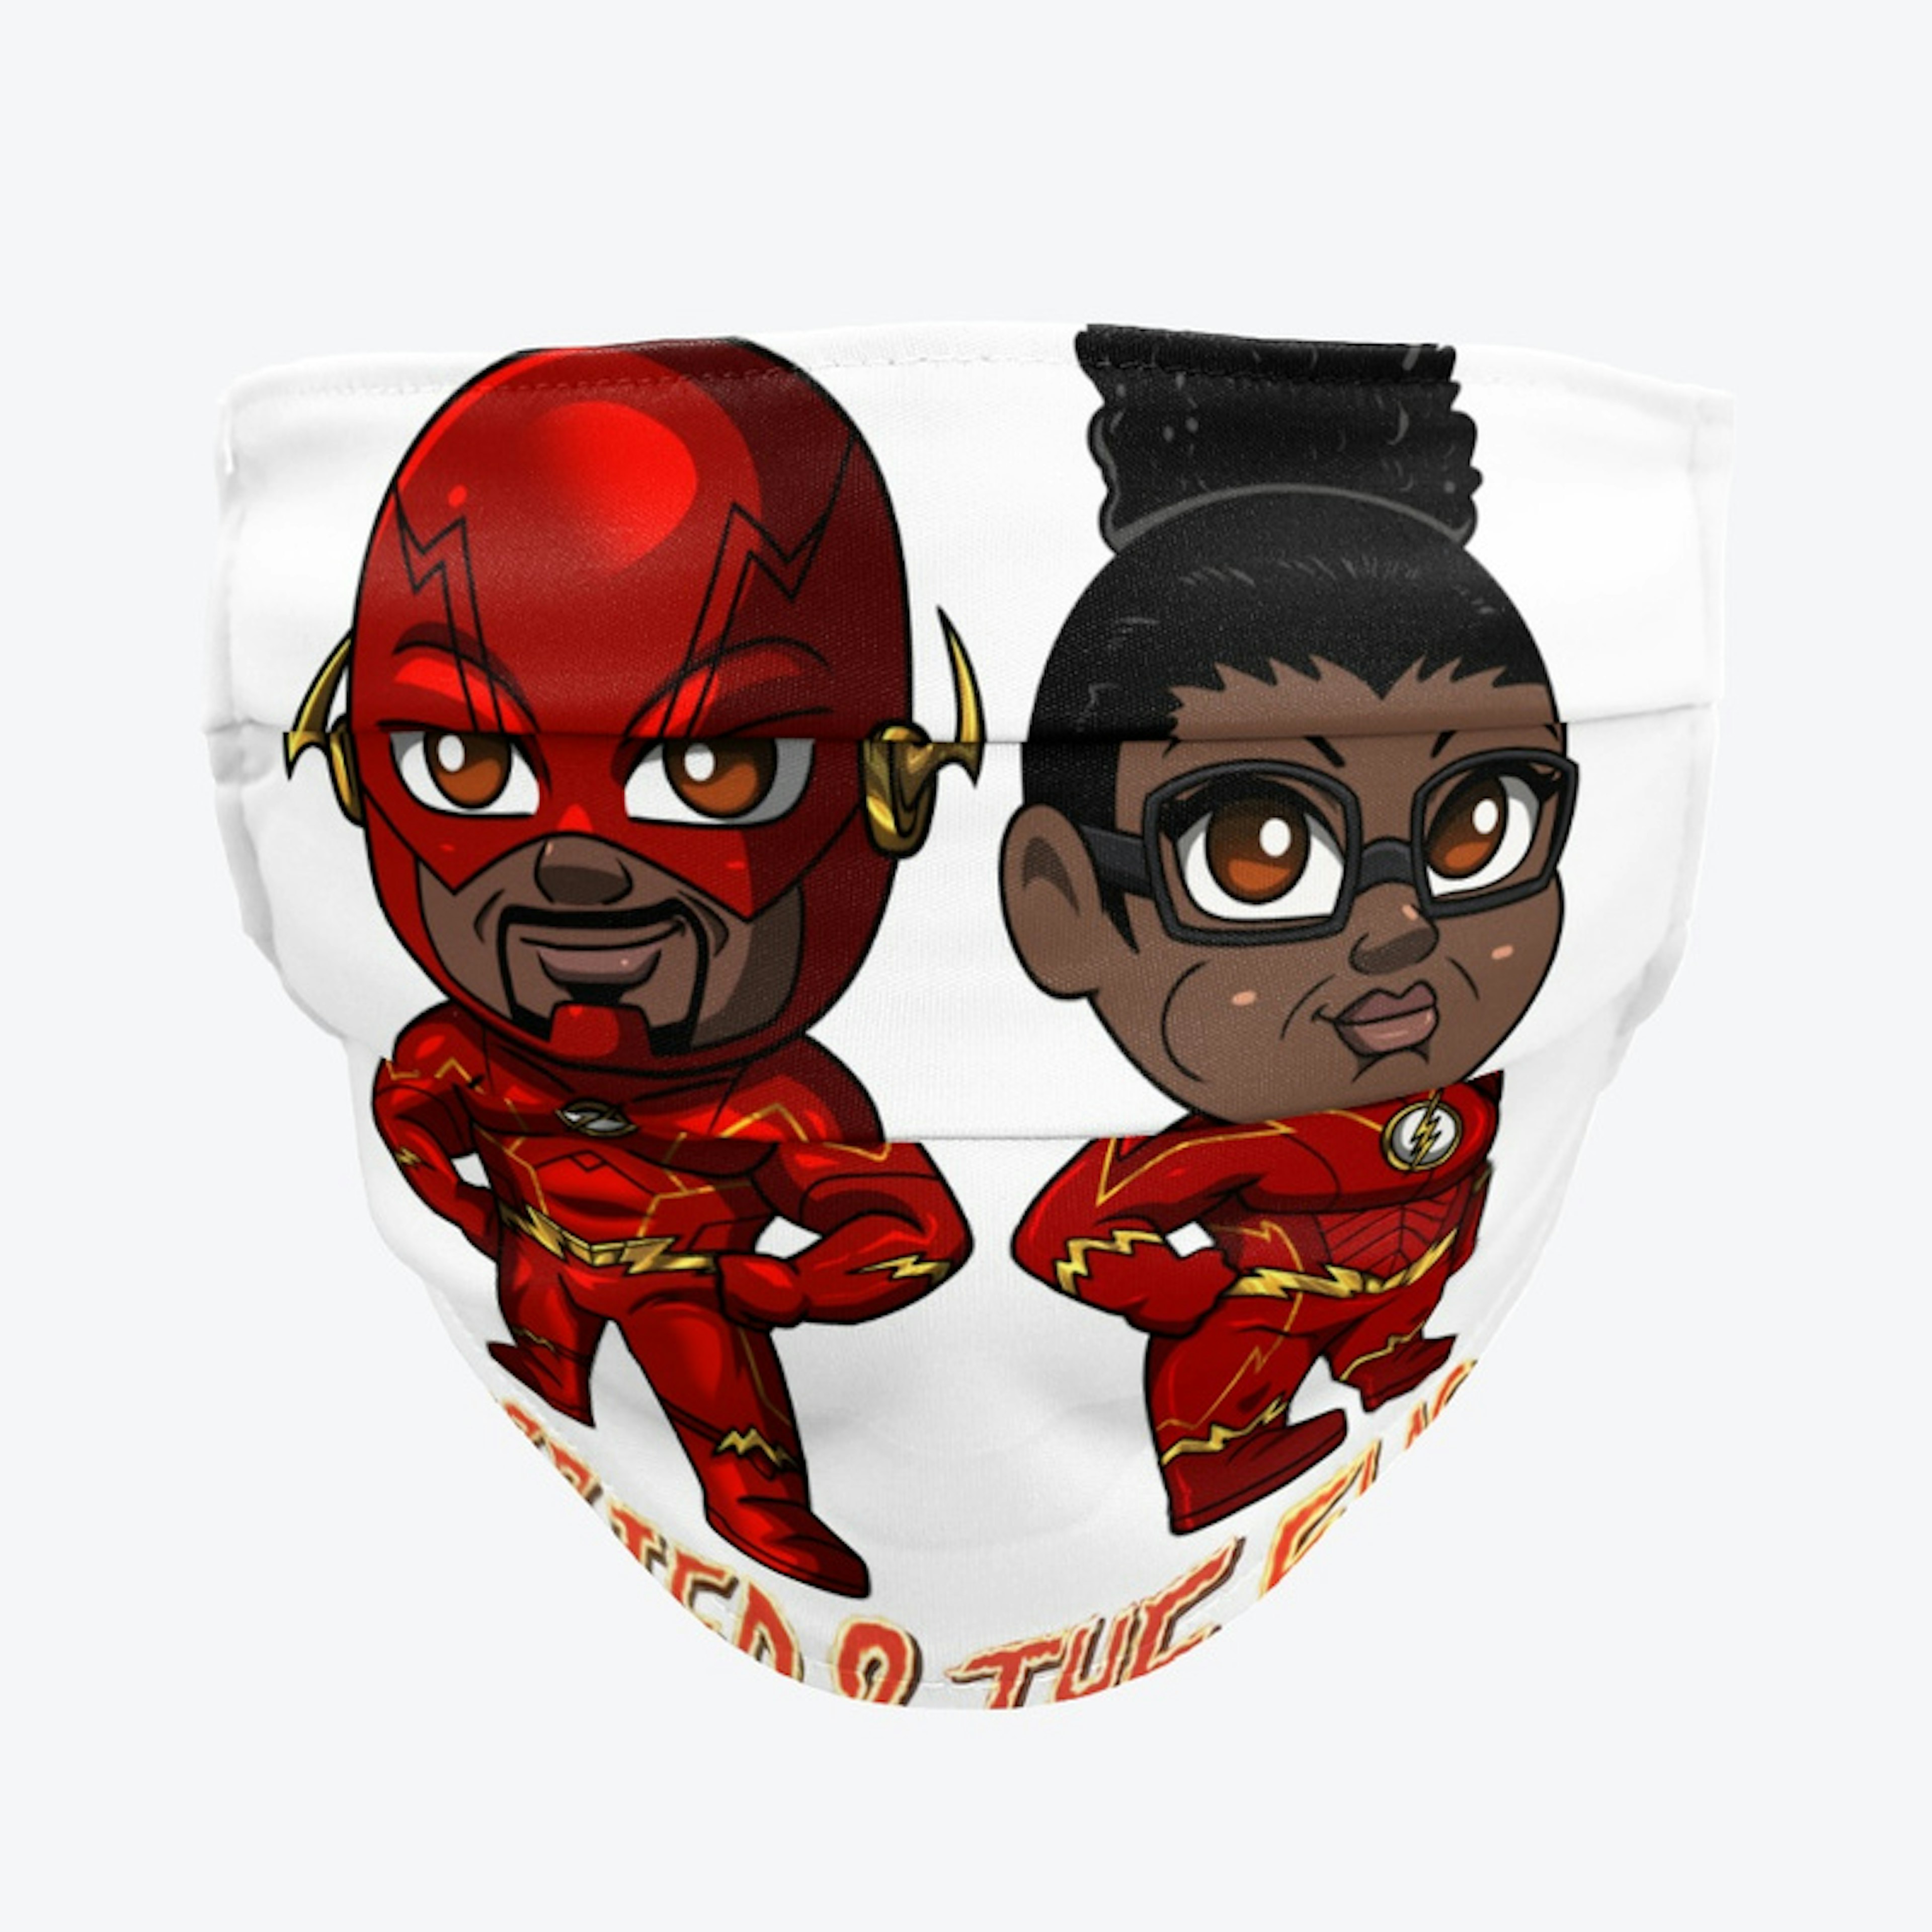 Married2theflash Accessories